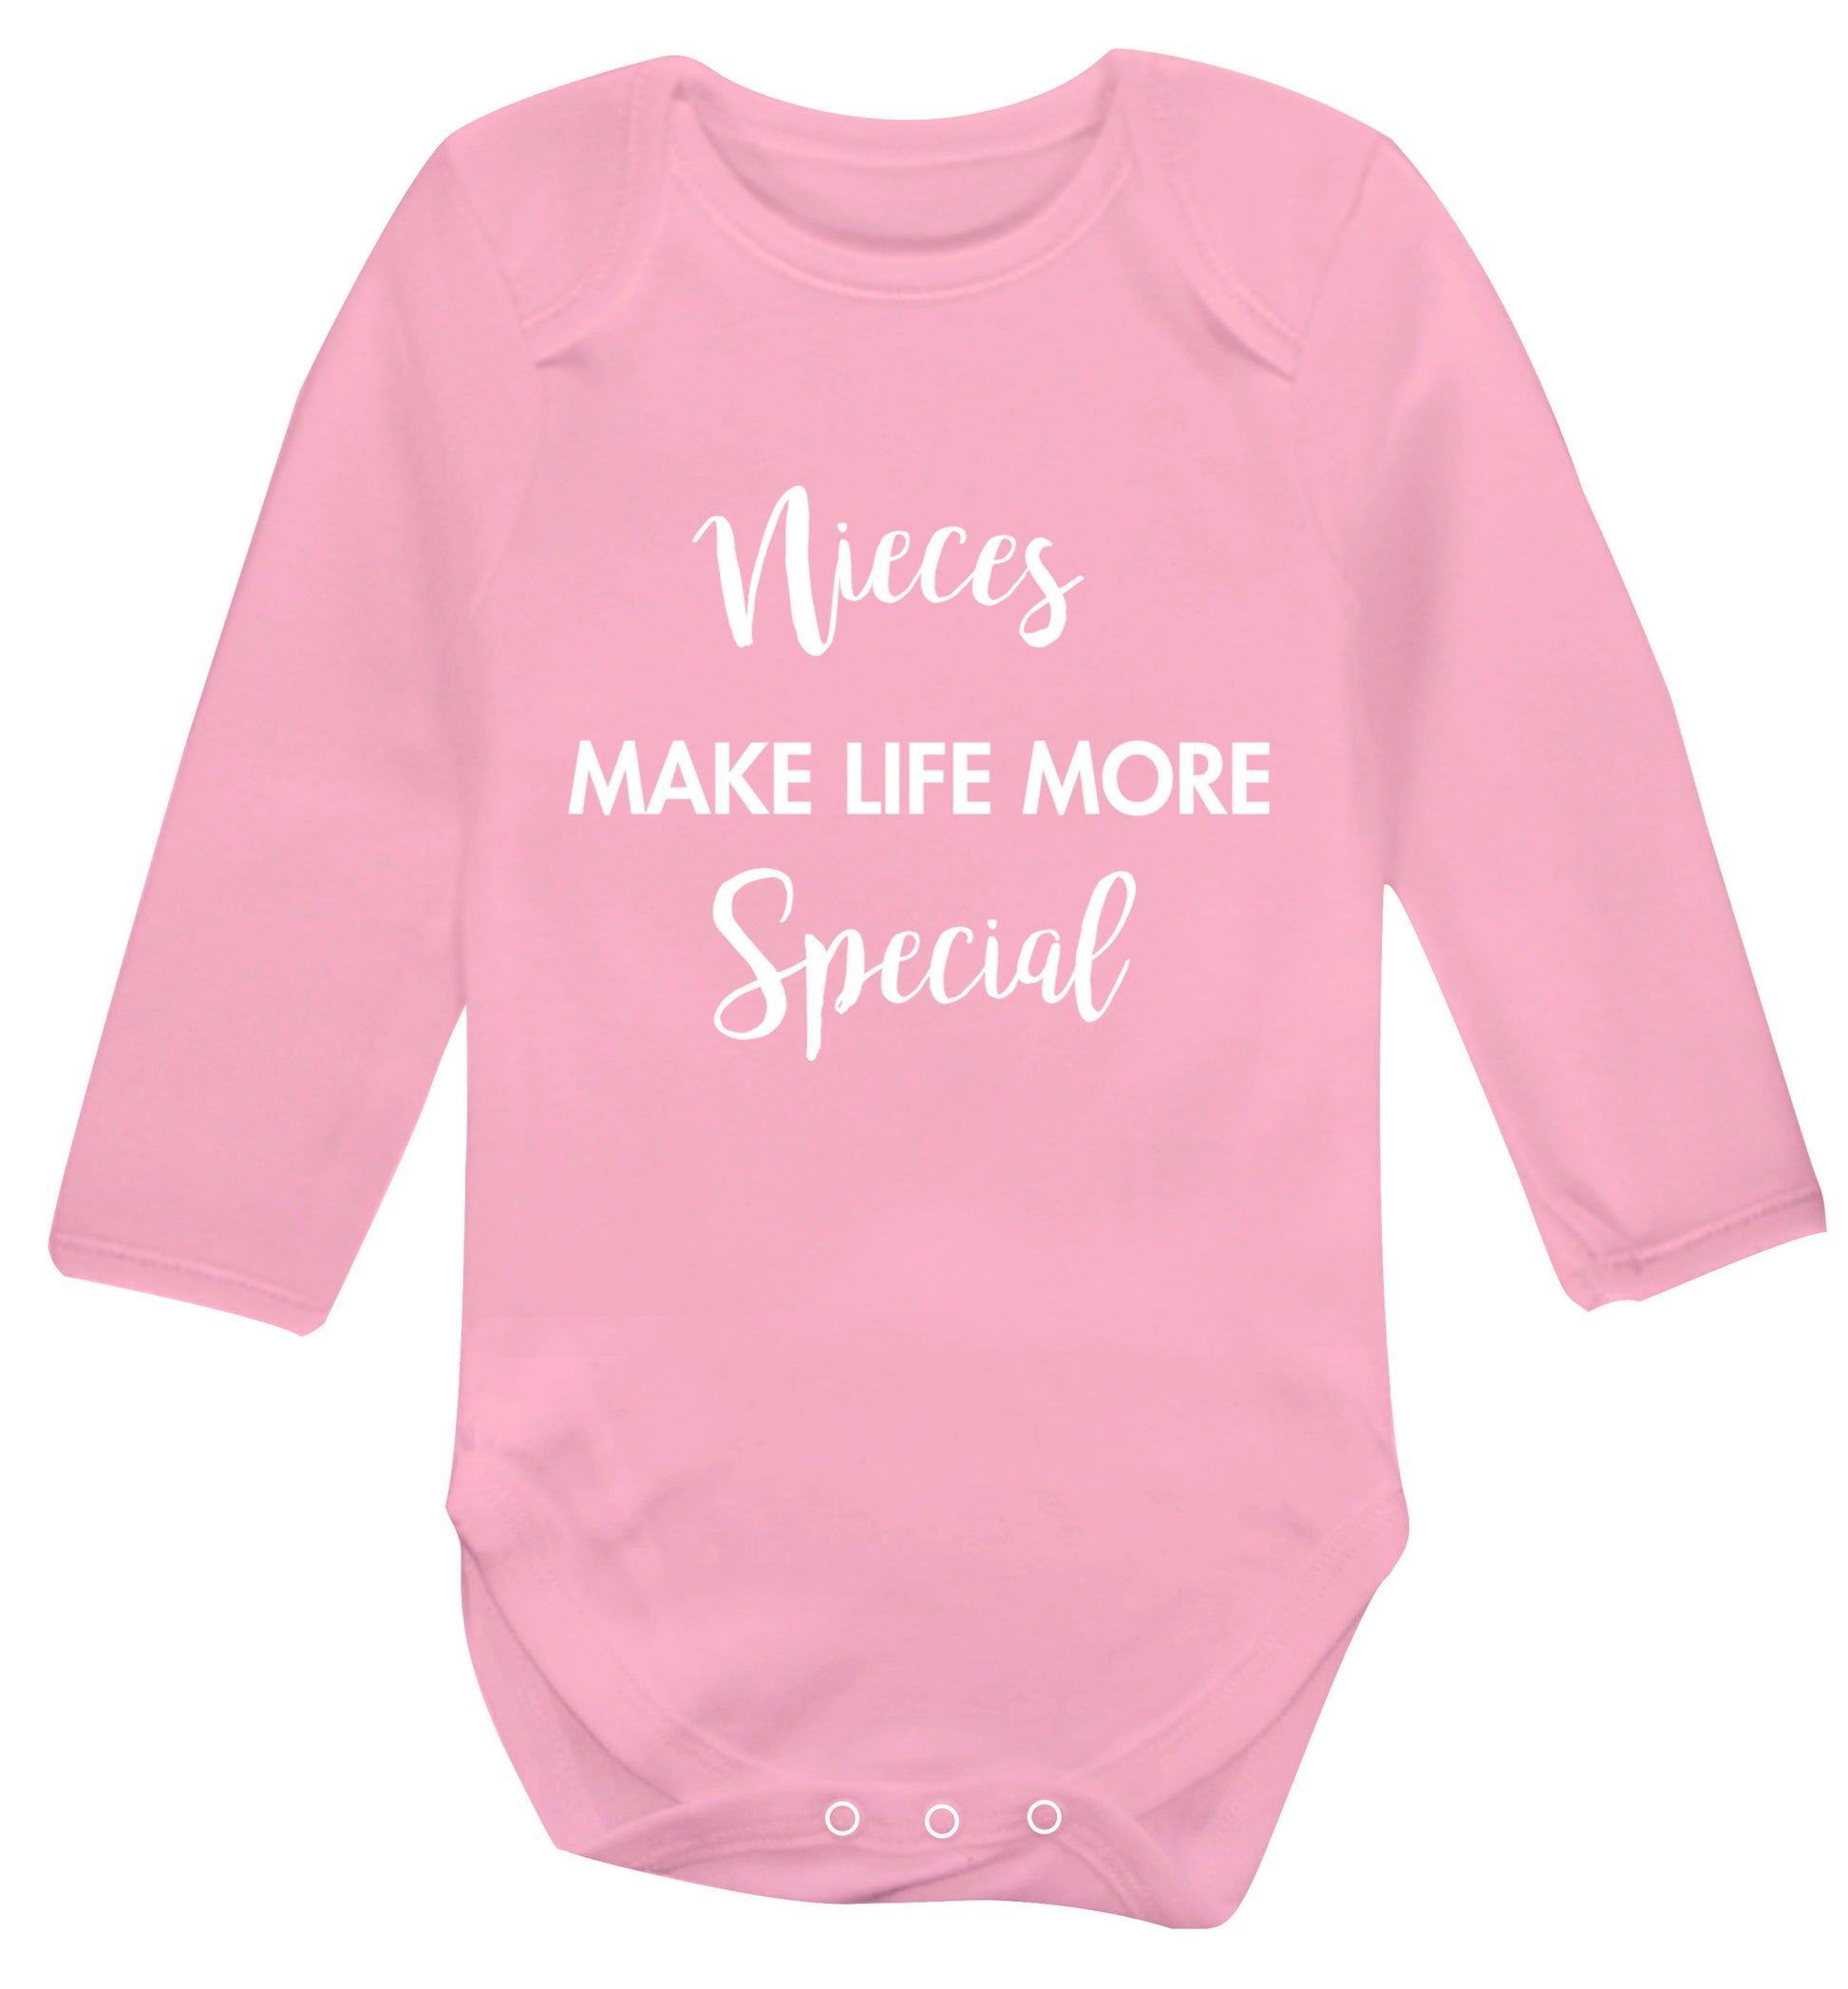 Nieces make life more special Baby Vest long sleeved pale pink 6-12 months